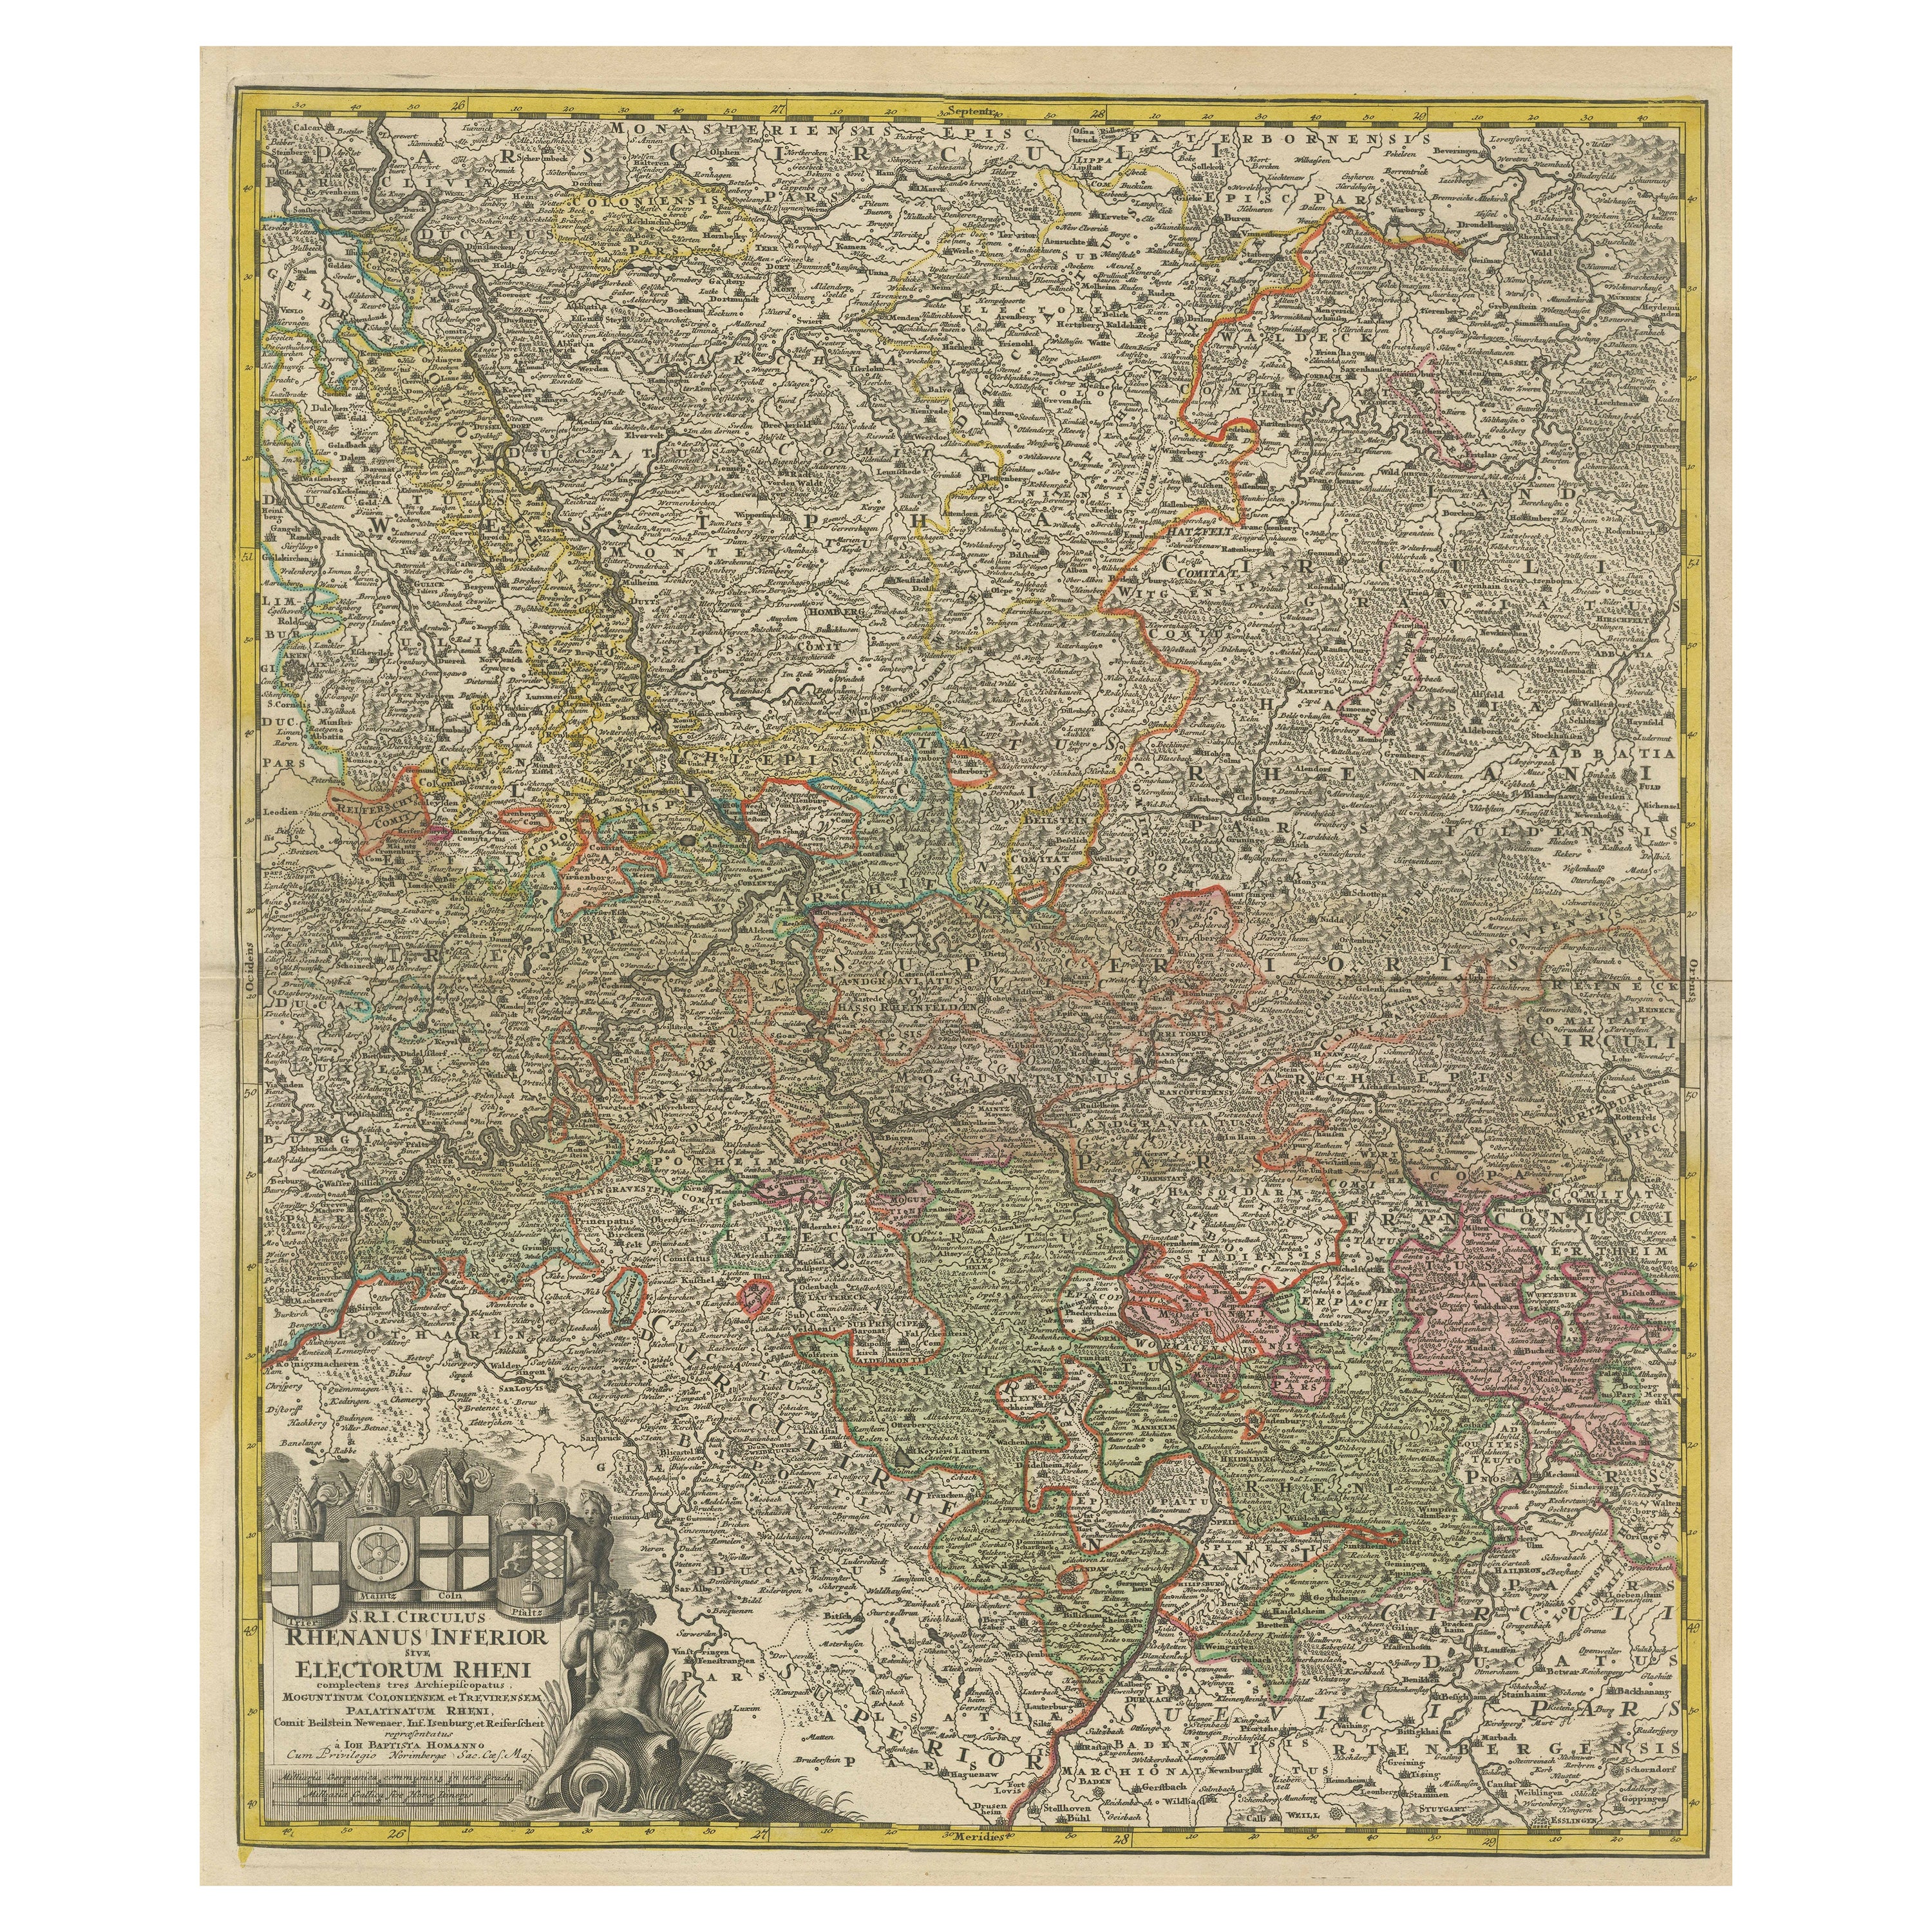 Detailed Antique Map of the Lower Rhine region, Germany